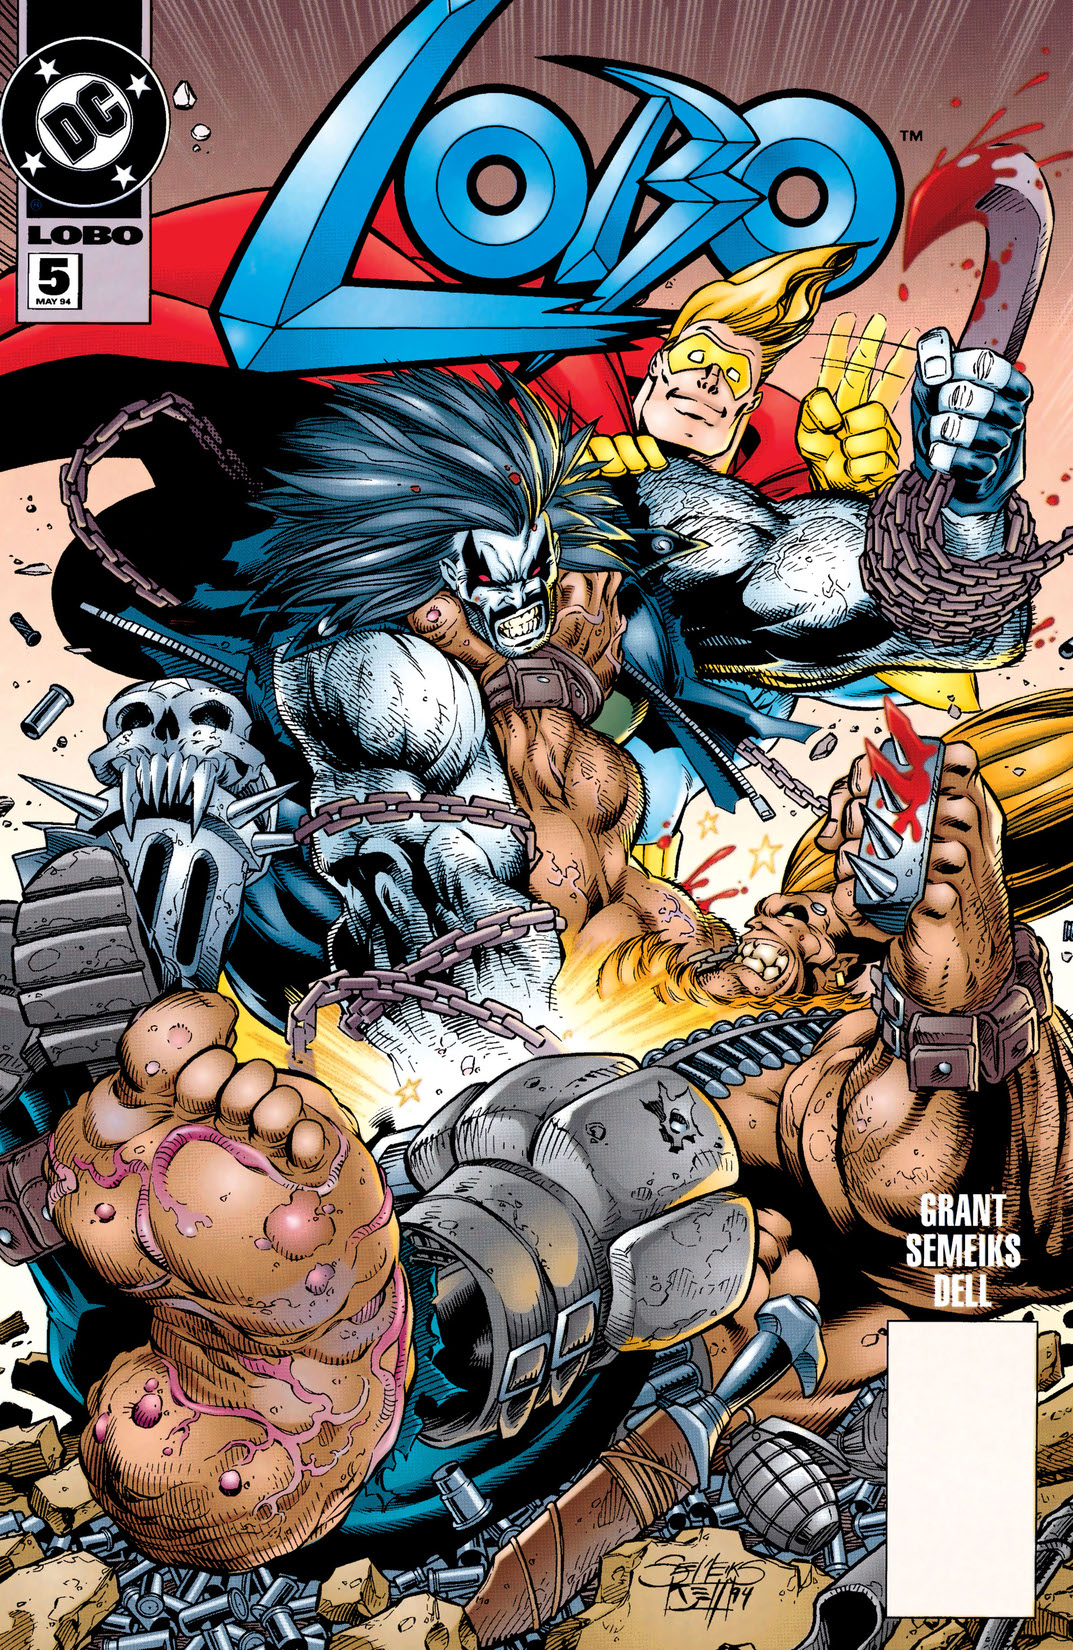 Lobo (1993-) #5 preview images